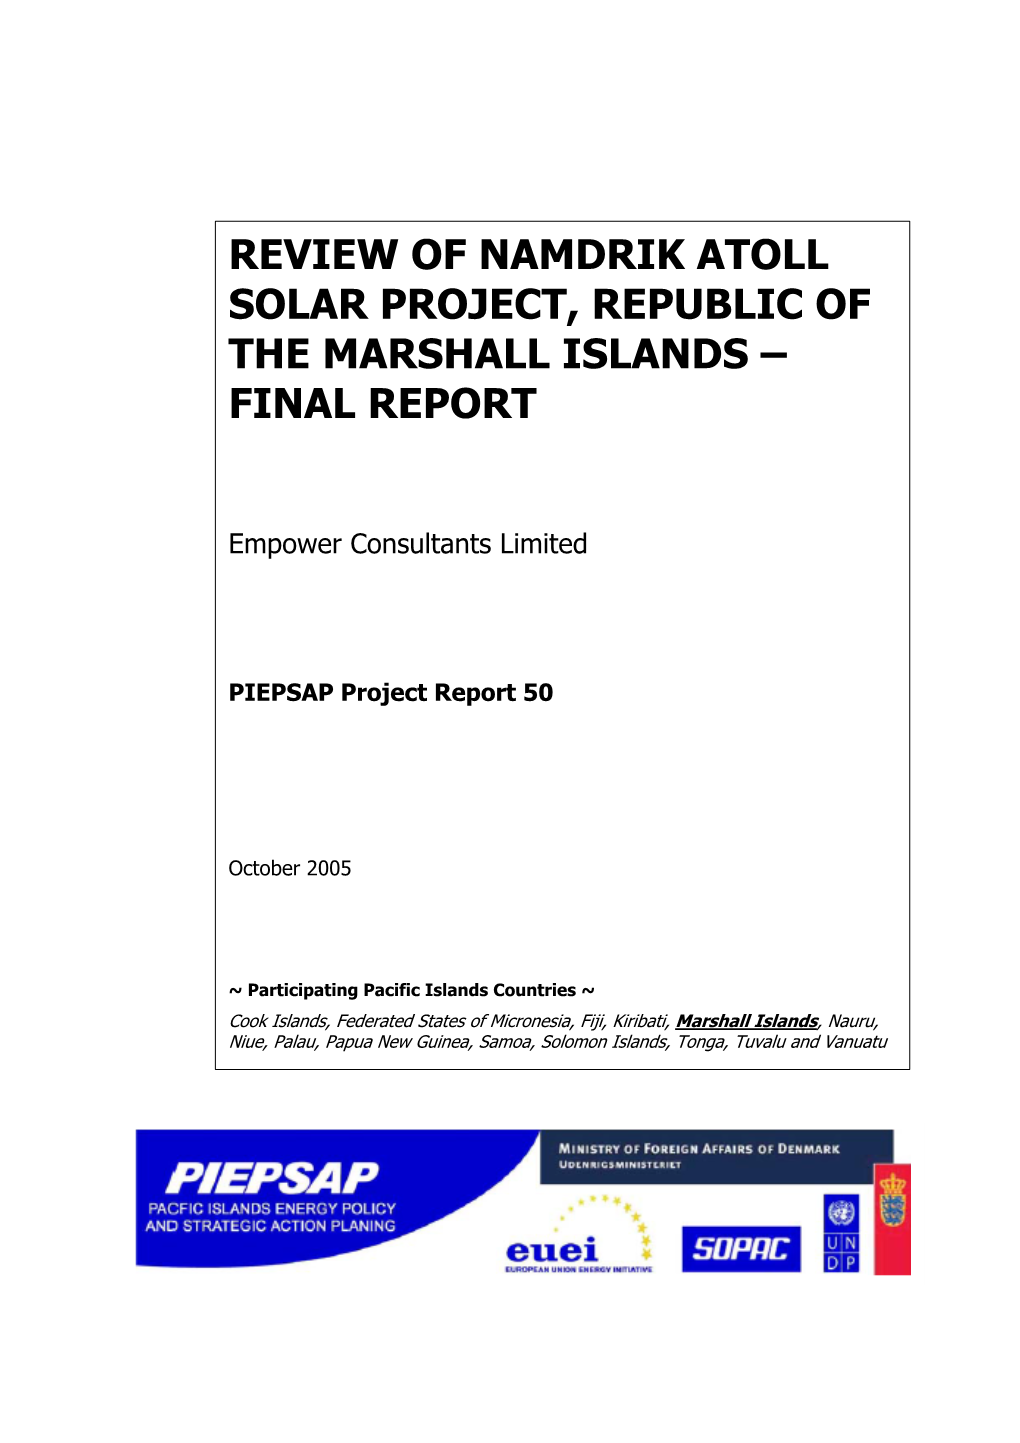 Review of Namdrik Atoll Solar Project, Republic of the Marshall Islands